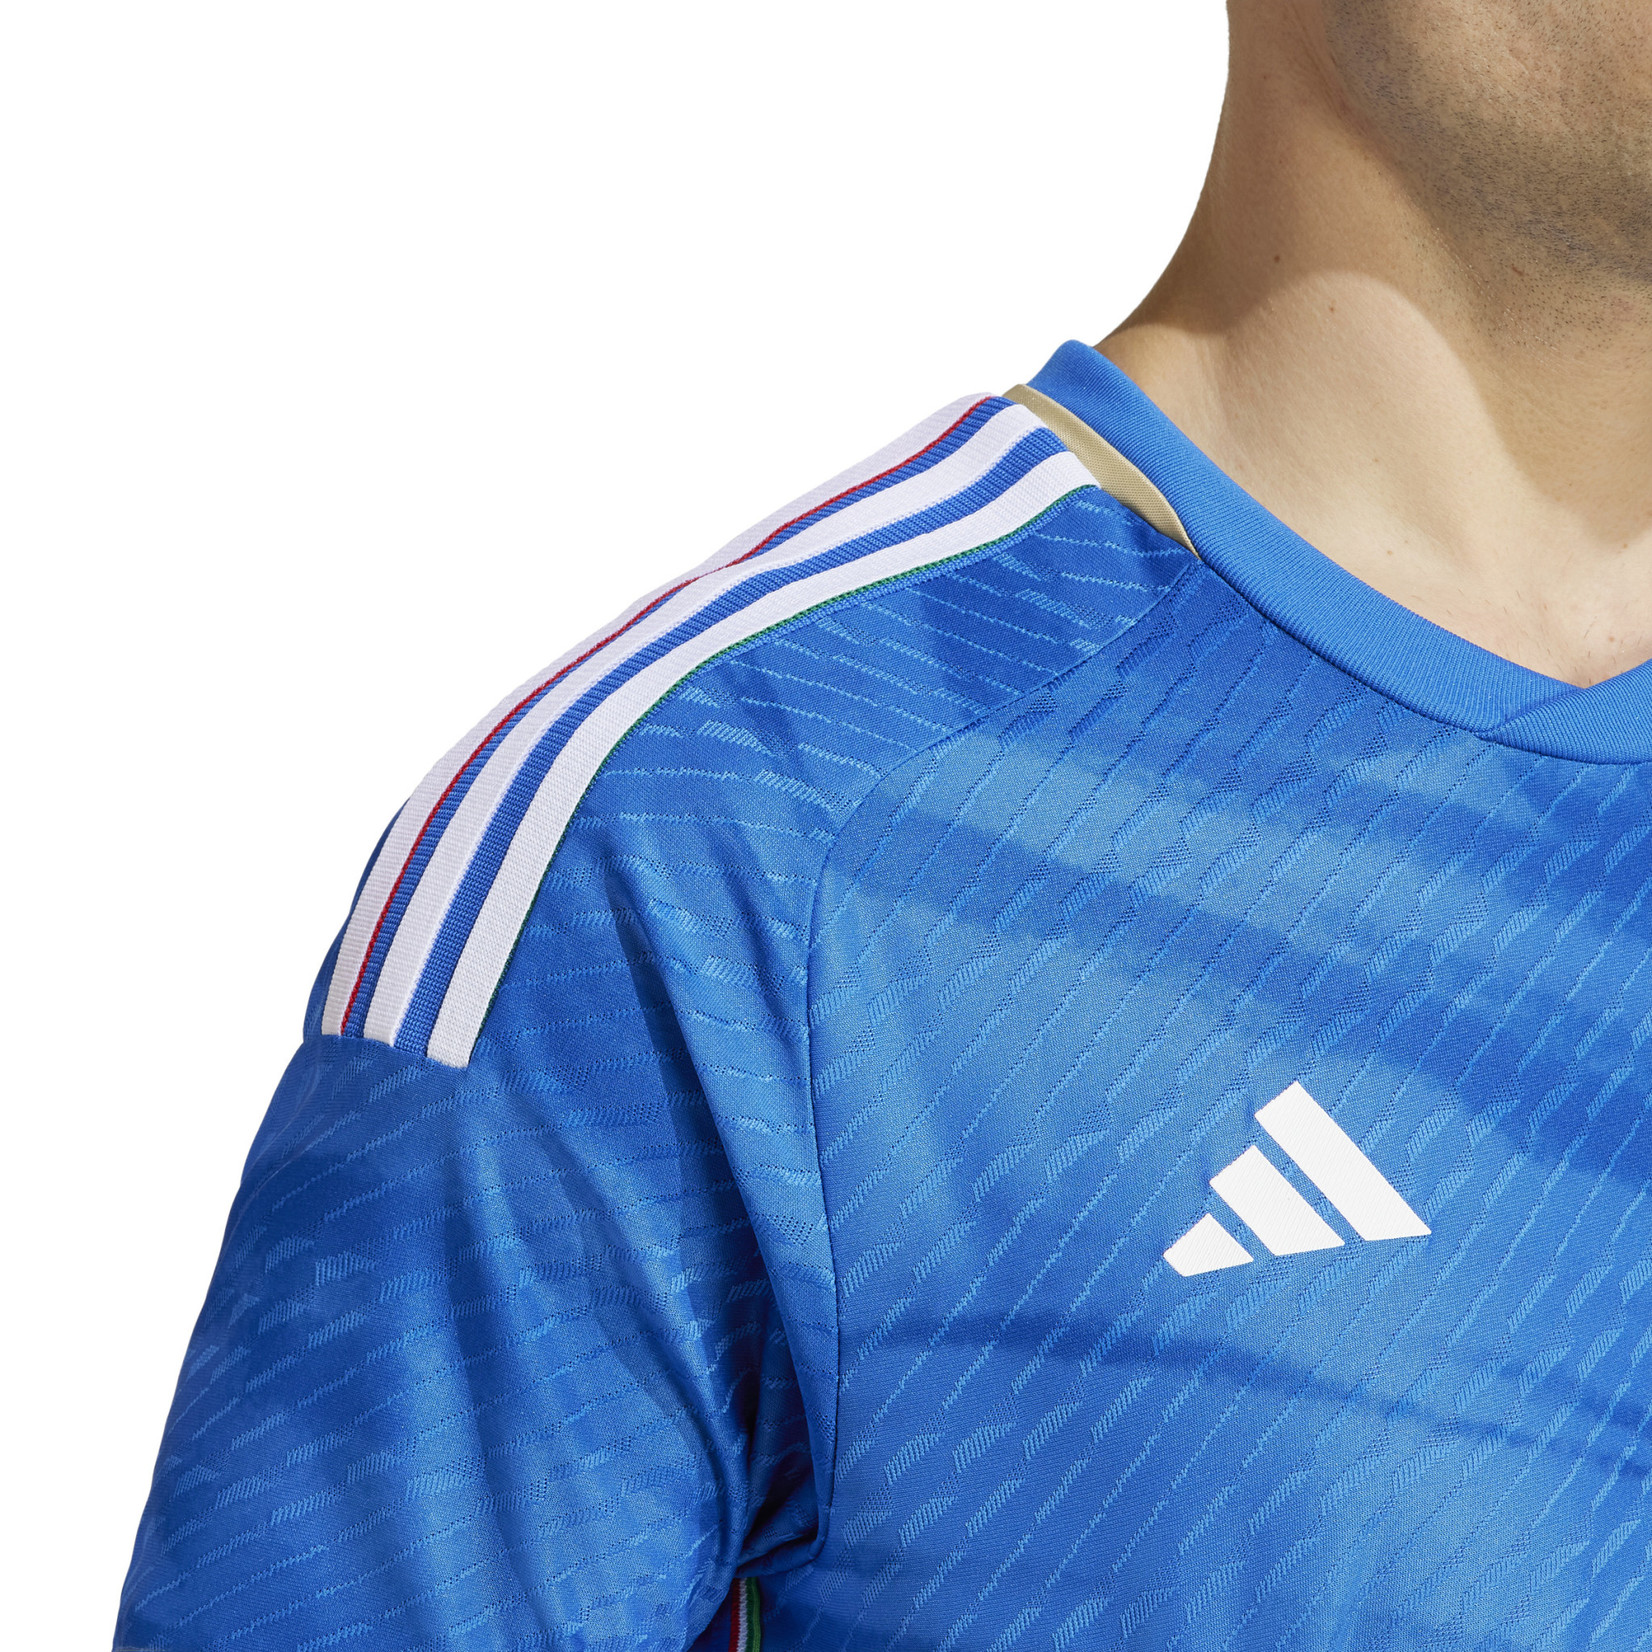 ADIDAS ITALY 2023 AUTHENTIC HOME JERSEY (BLUE)